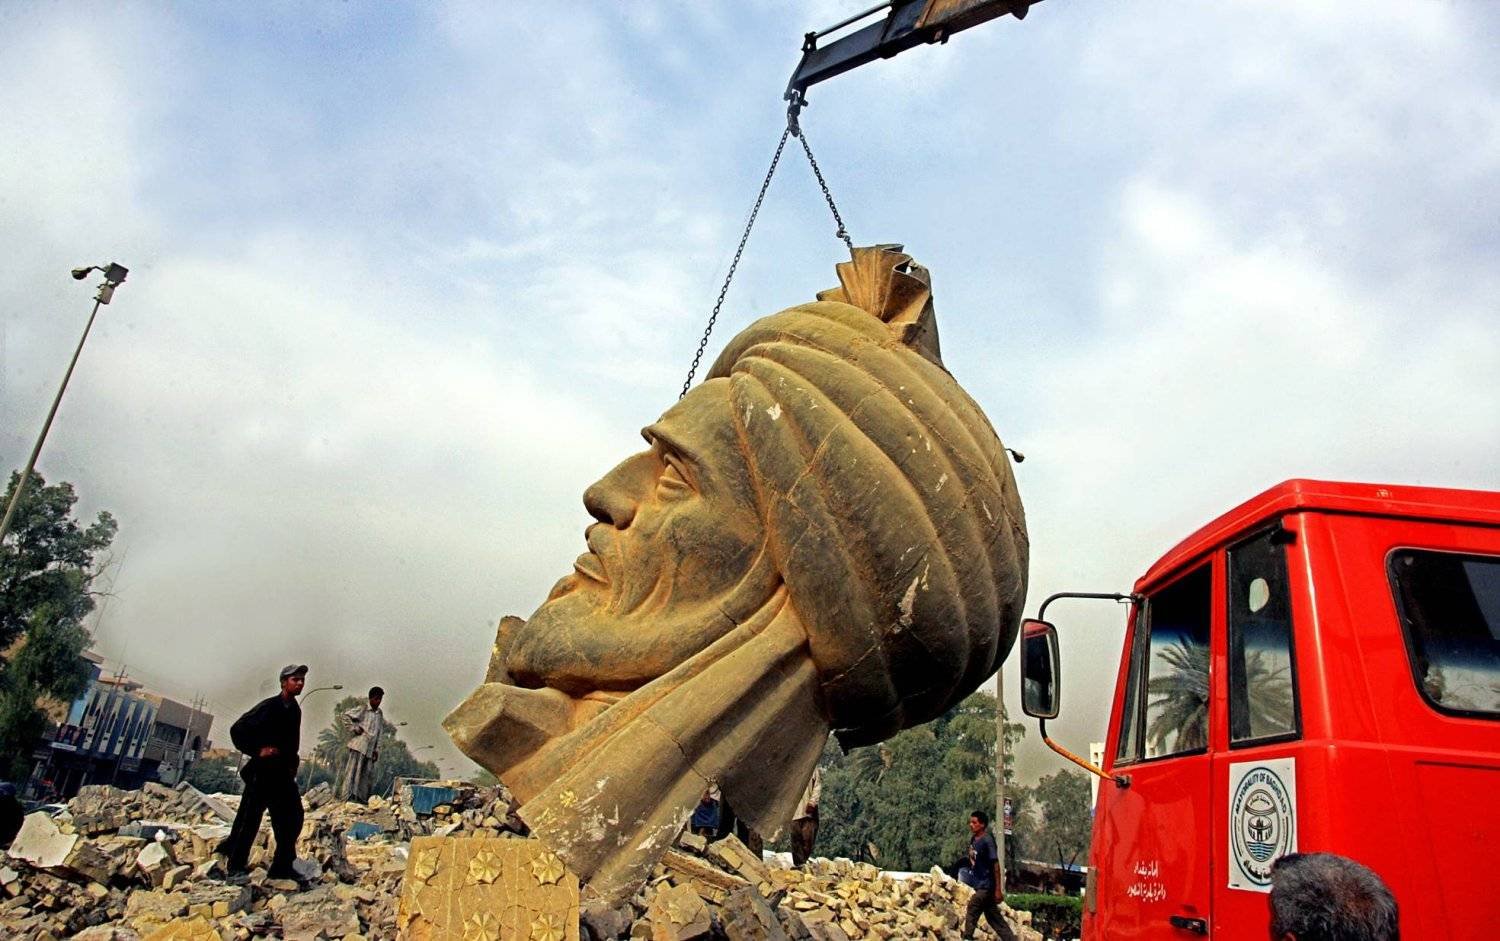 A crane lifts the bust of Abu Jafar Al-Mansur from the site of an explosion that targeted it in 2005 (AFP)